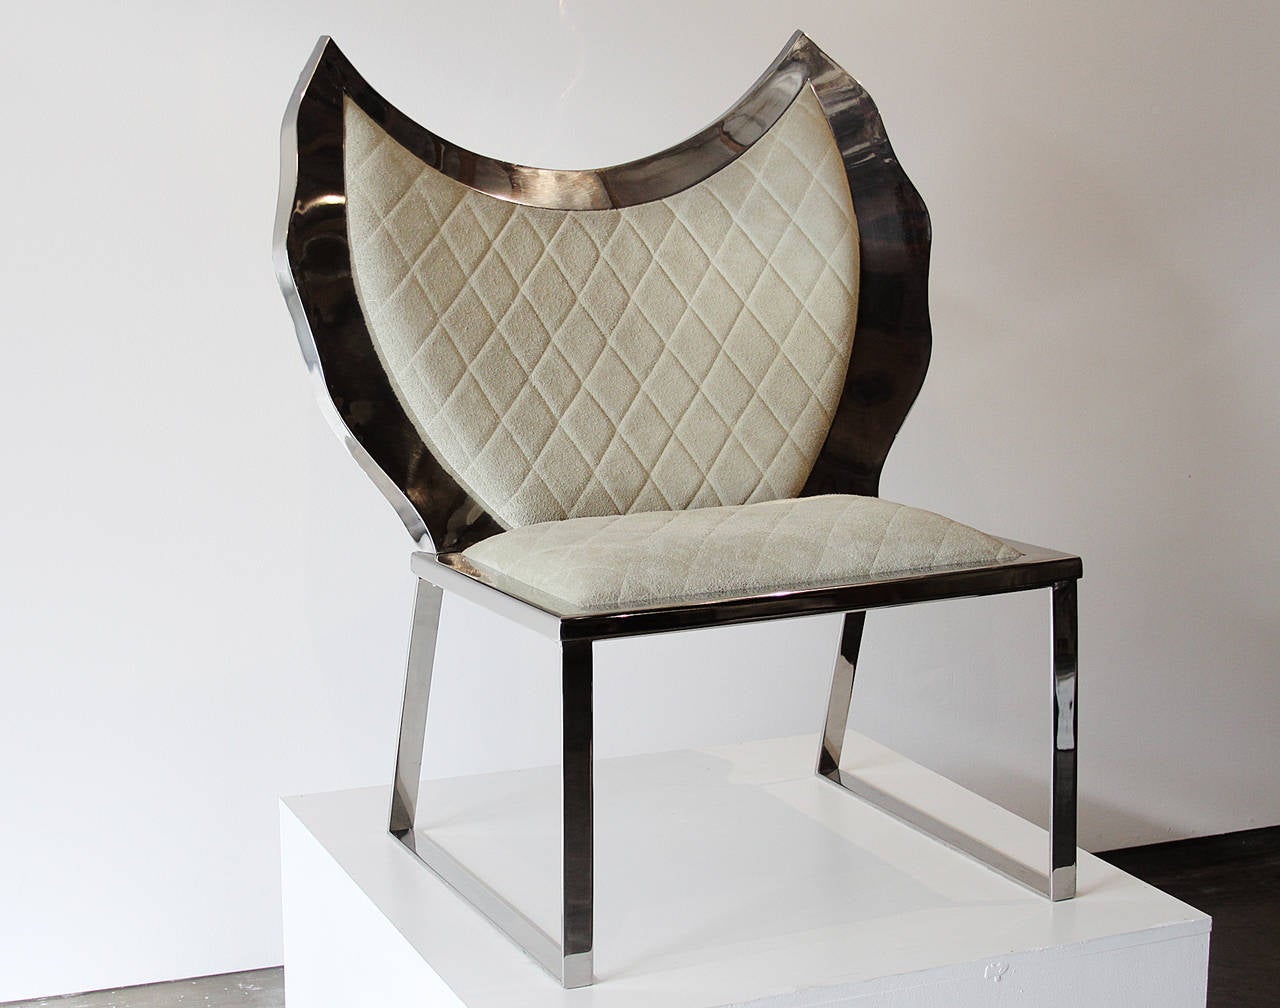 A one of a kind chair by Brazilian designer Alê Jordão. The frame is made of polished stainless steel and the cushion is upholstered in a cream suede.

Many pieces are stored in our warehouse, so please click on CONTACT DEALER under our logo